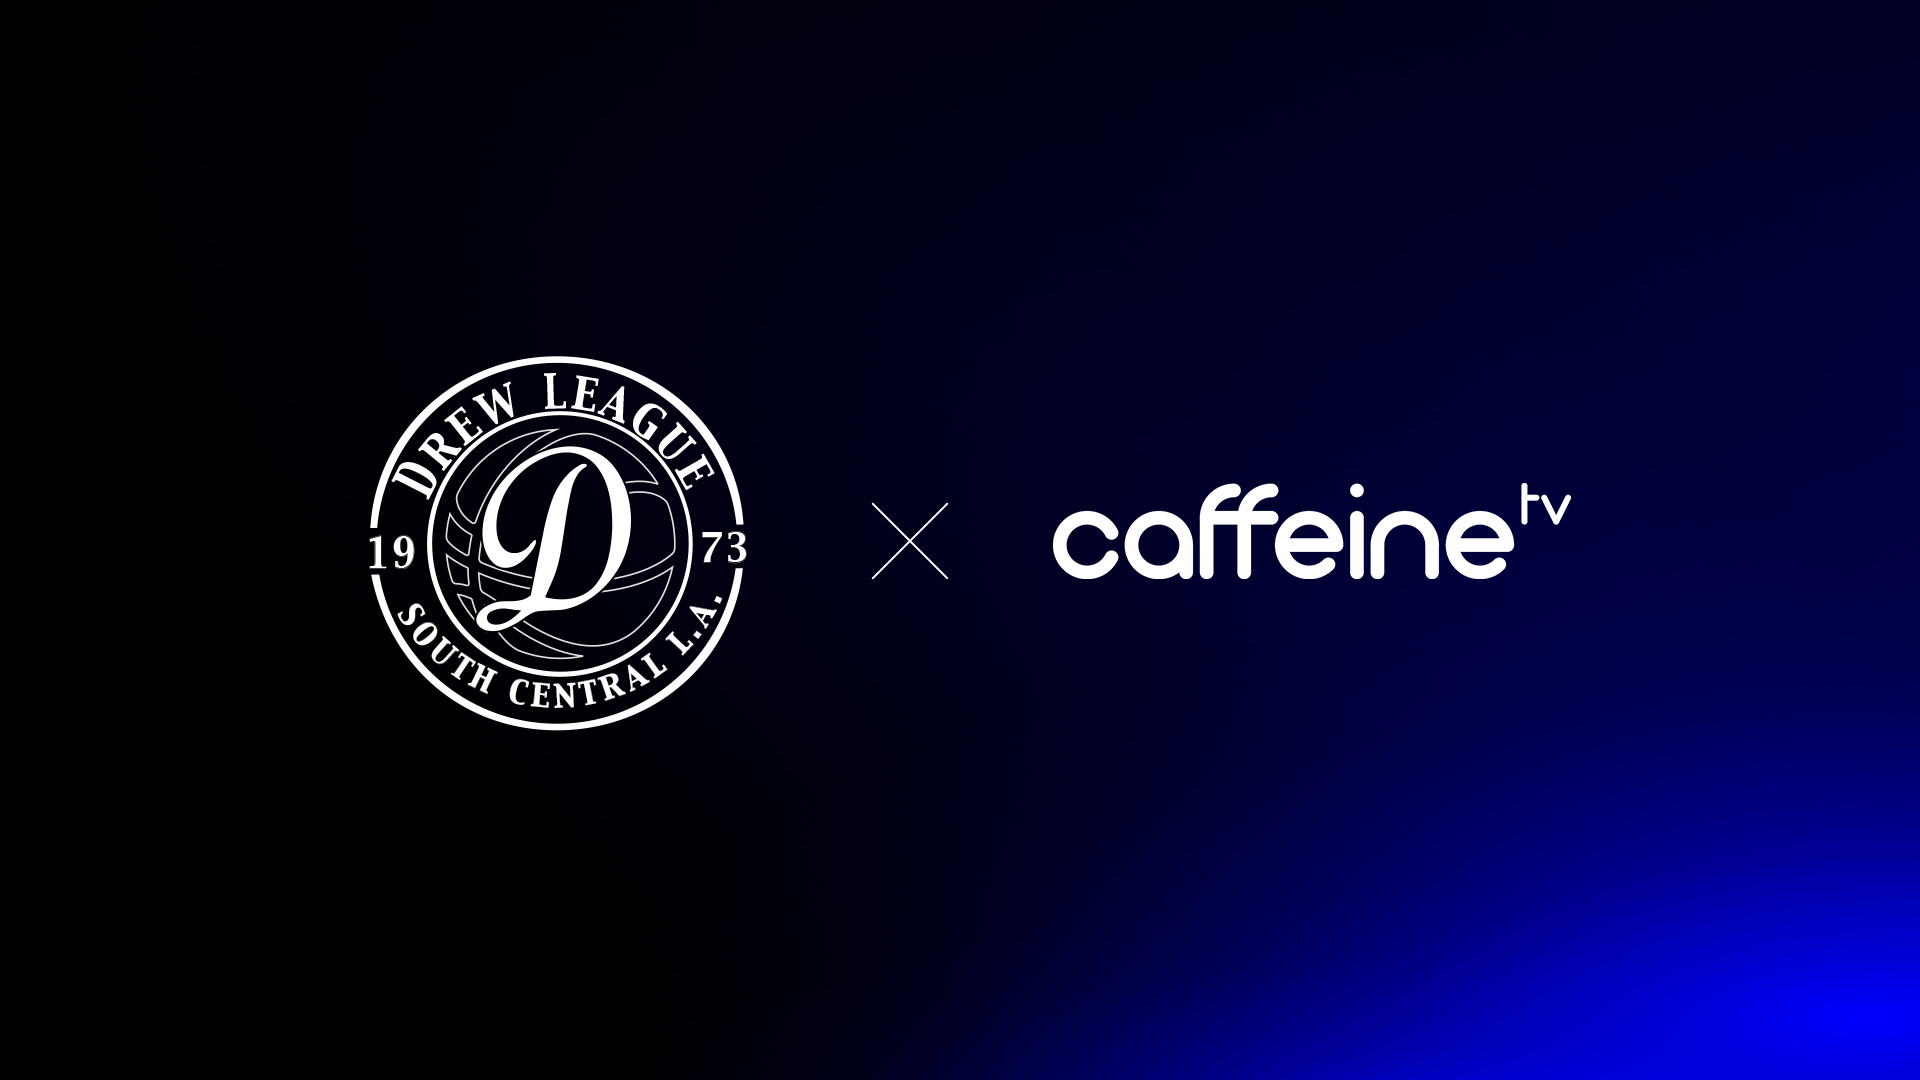 Drew League Selects Caffeine as Home for 2022 Content